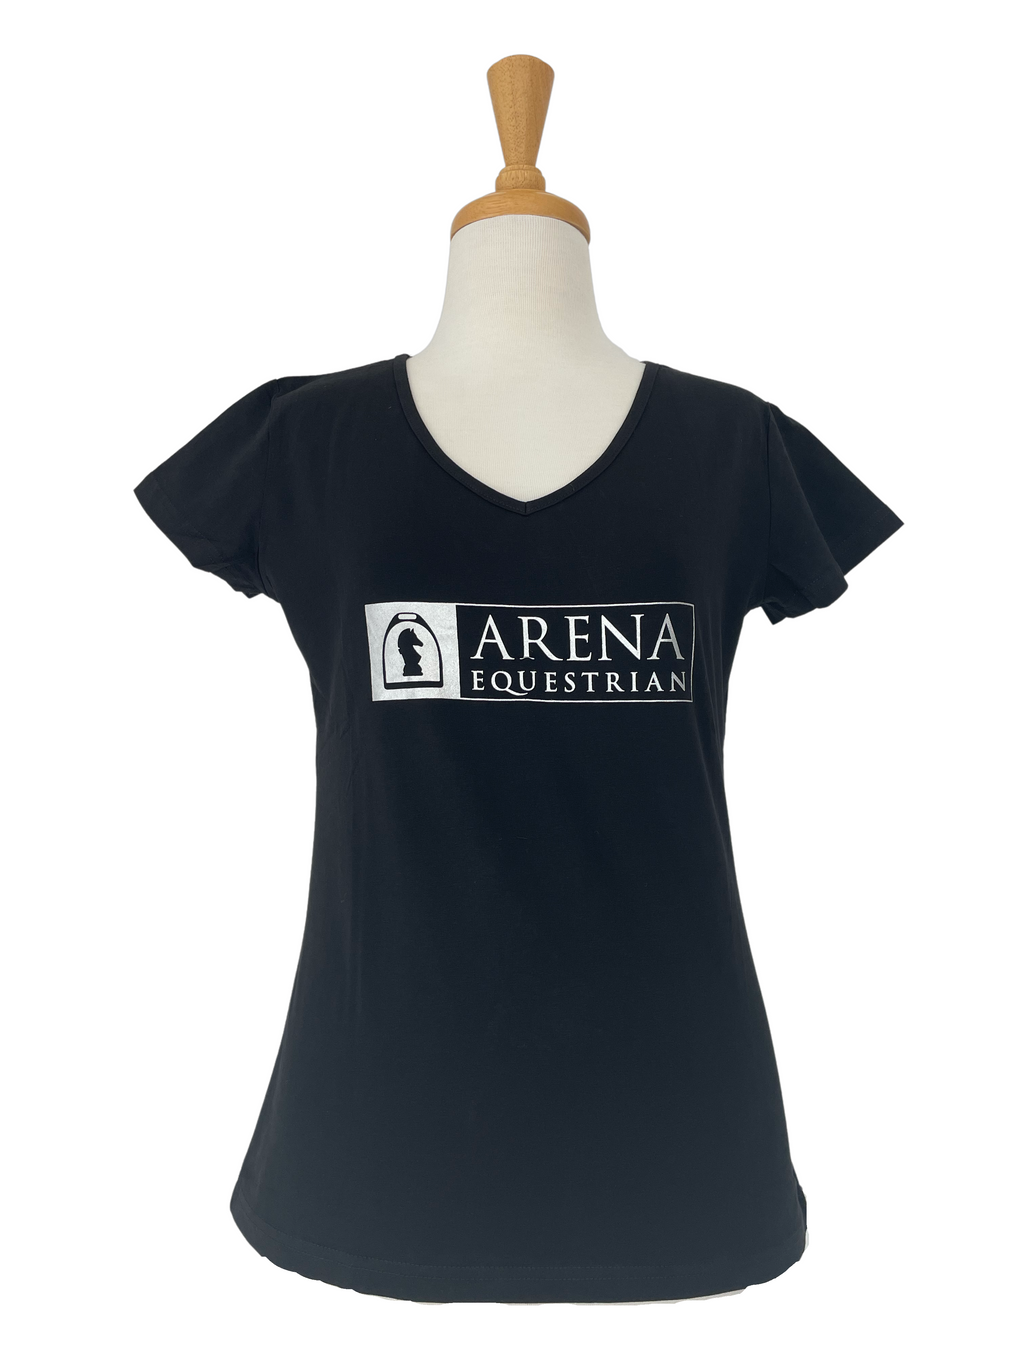 Arena Equestrian Silver Print Tee